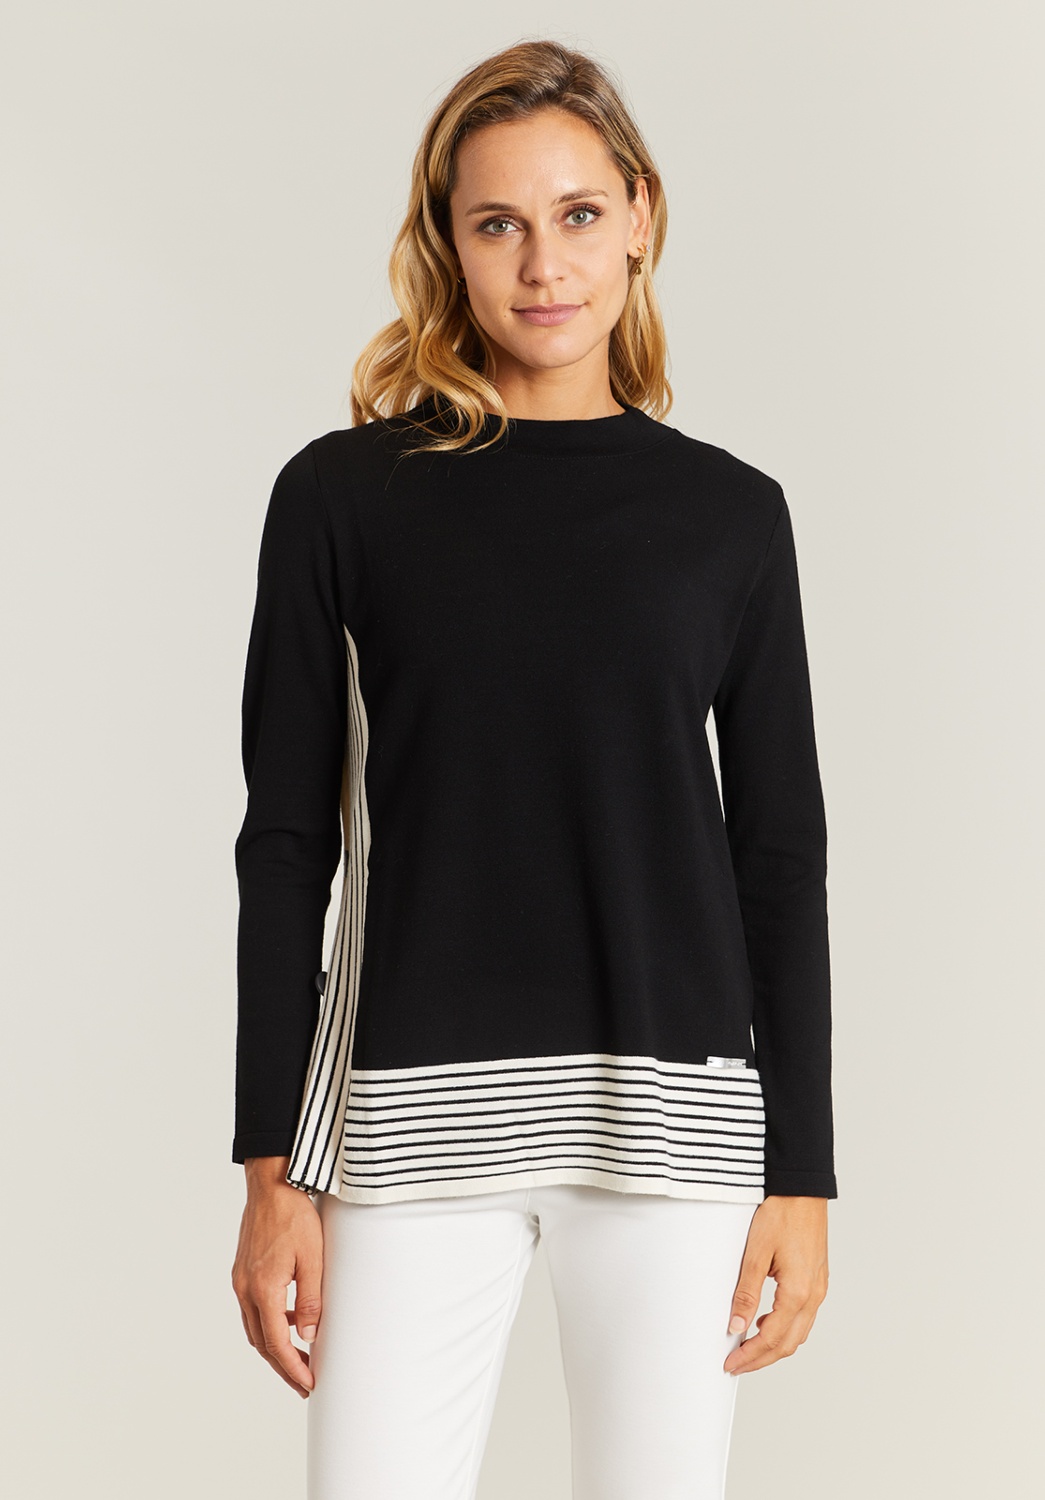 Black Sweater With Stripes 1